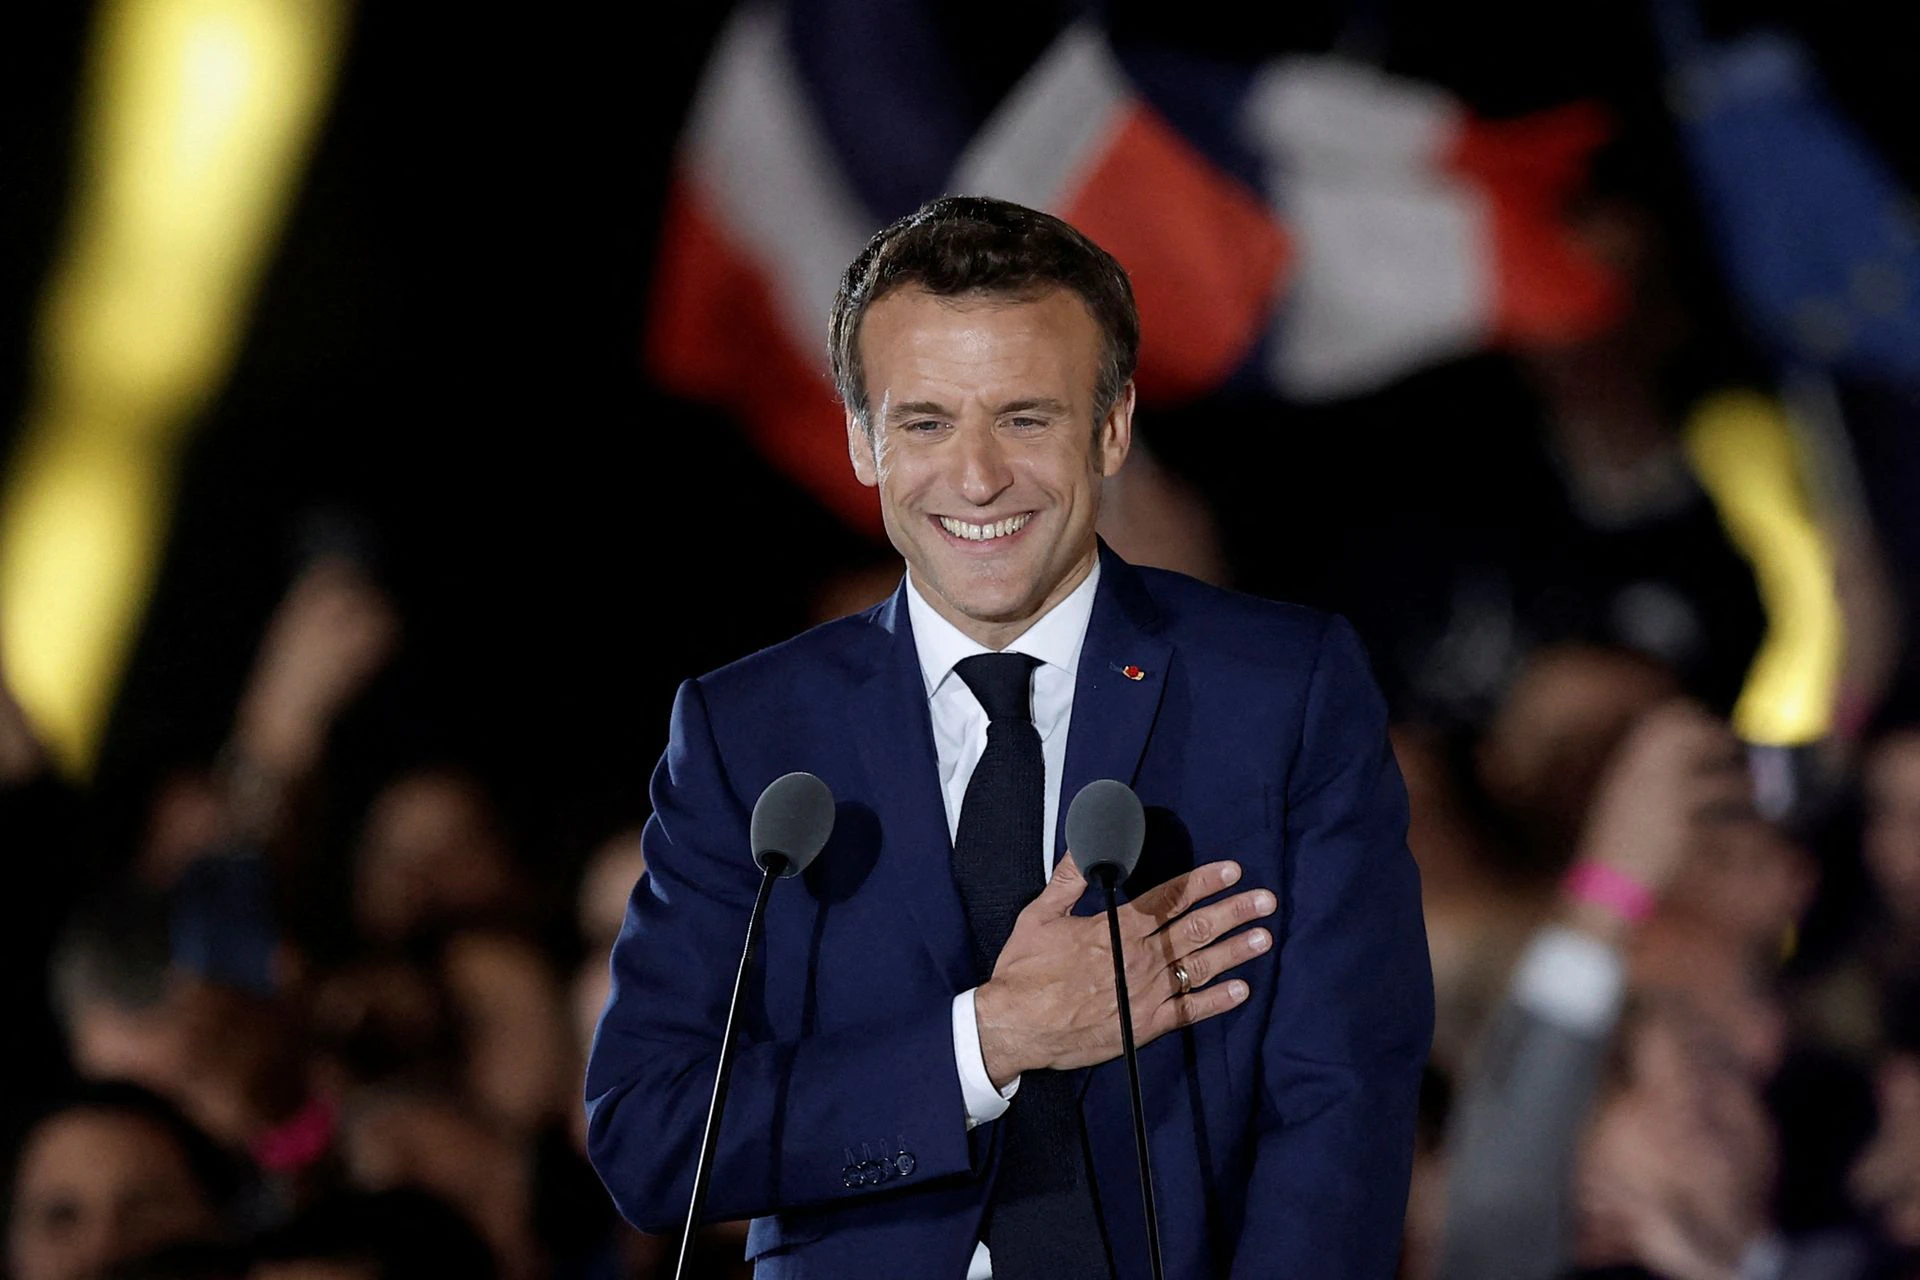 AN UNSURPRISING VICTORY FOR MACRON OVER LE PEN